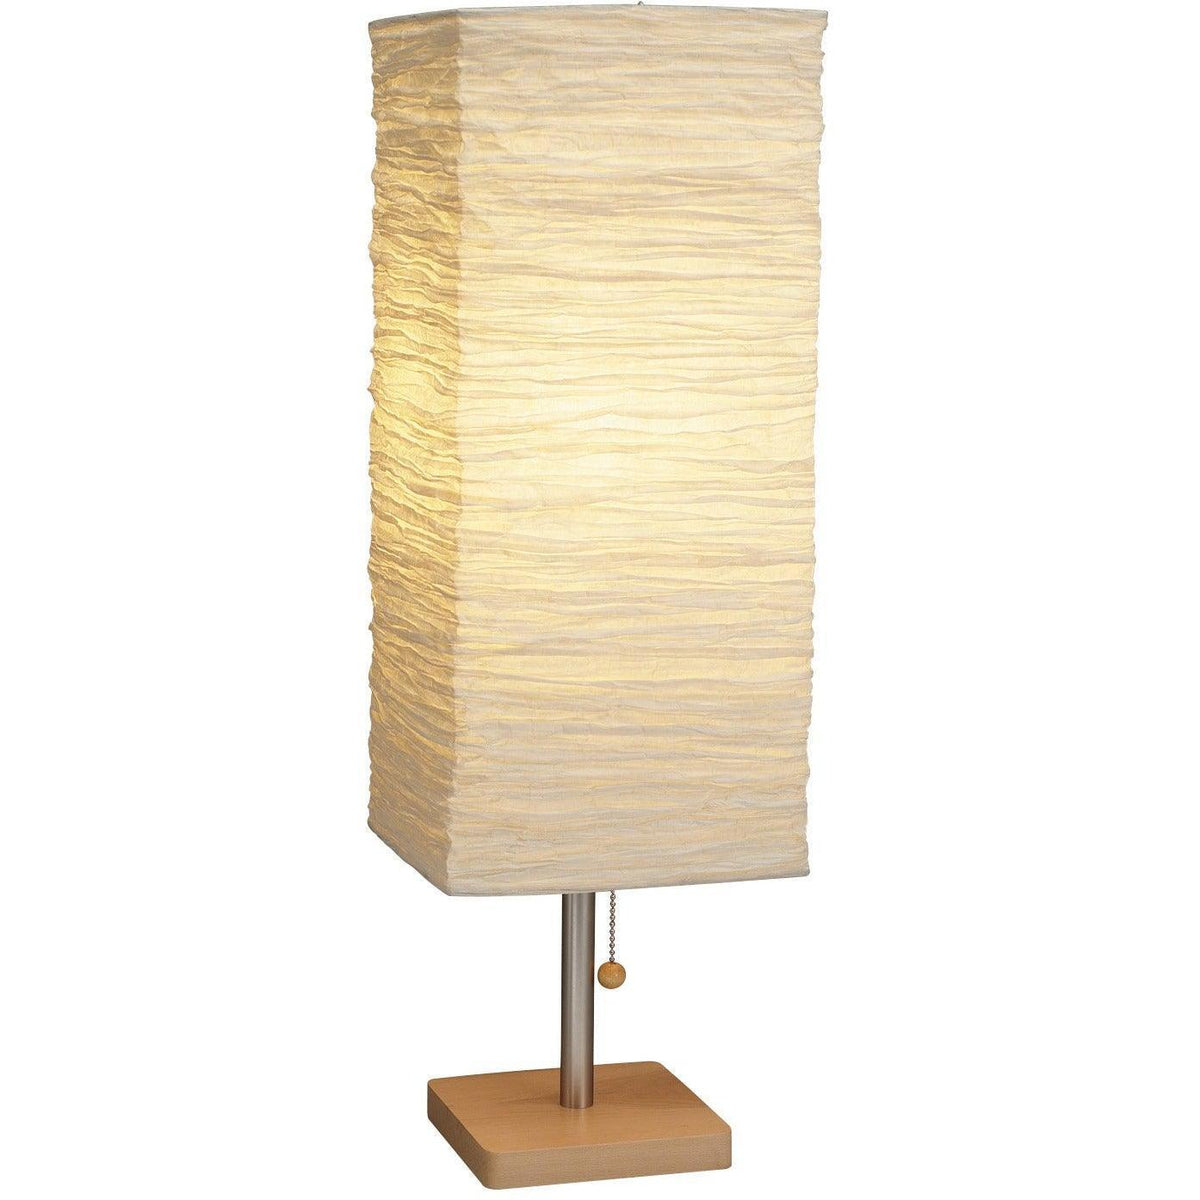 Adesso Home - Dune Table Lamp - 8021-12 | Montreal Lighting & Hardware